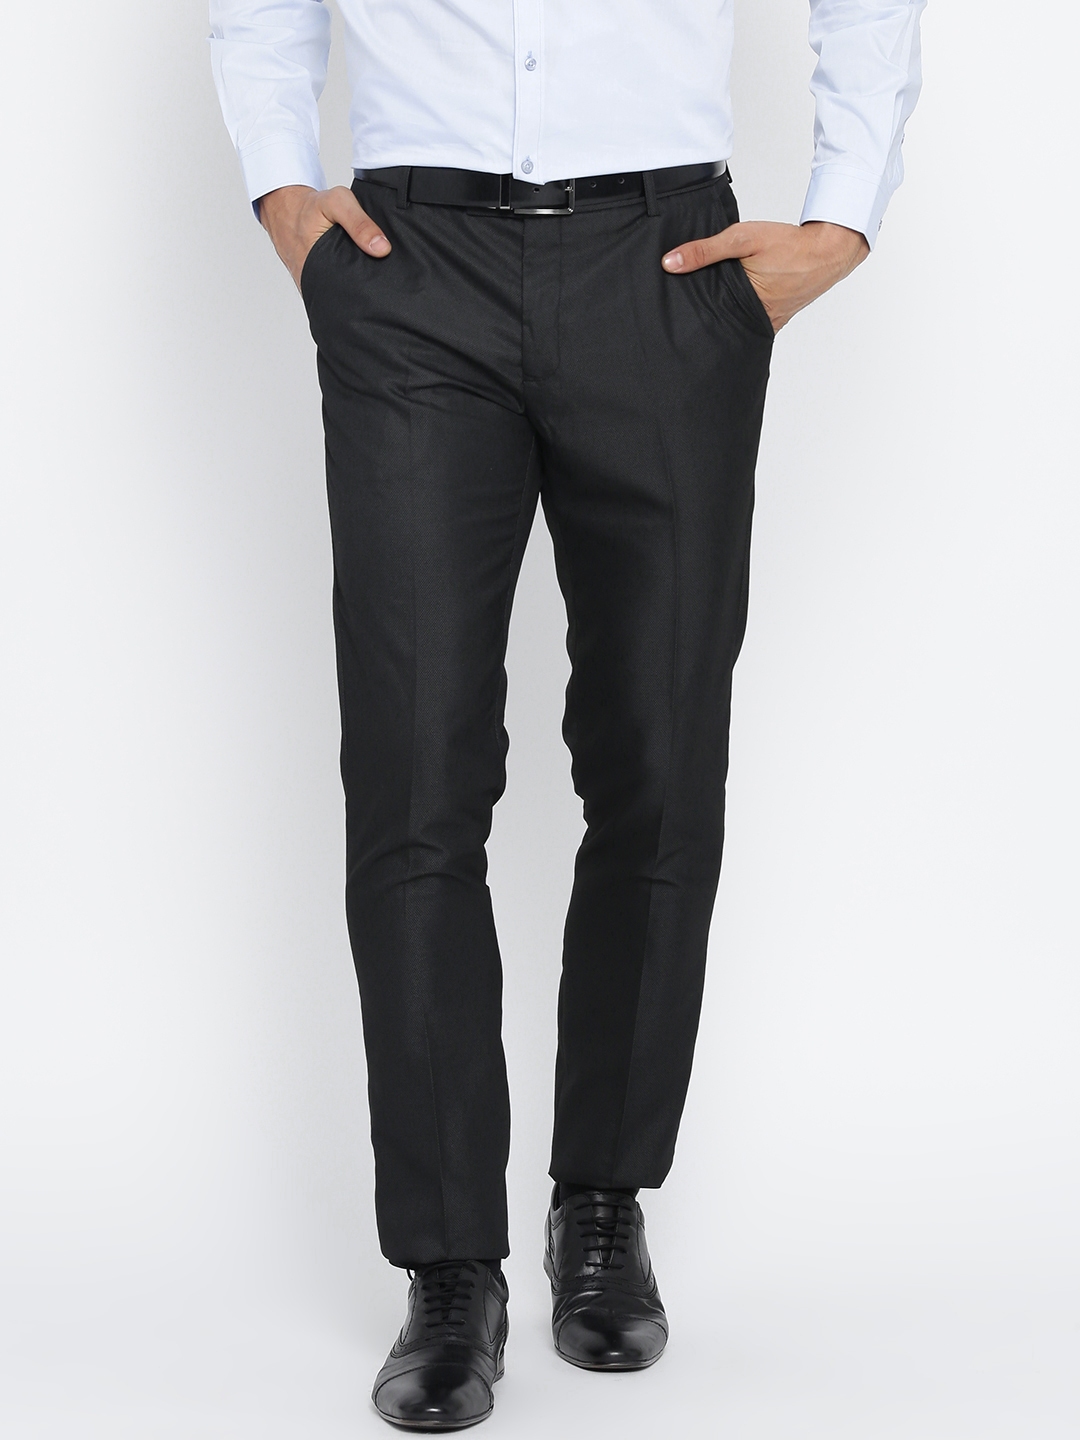 Buy Black Coffee Charcoal Grey Sharp Fit Formal Trousers - Trousers for ...